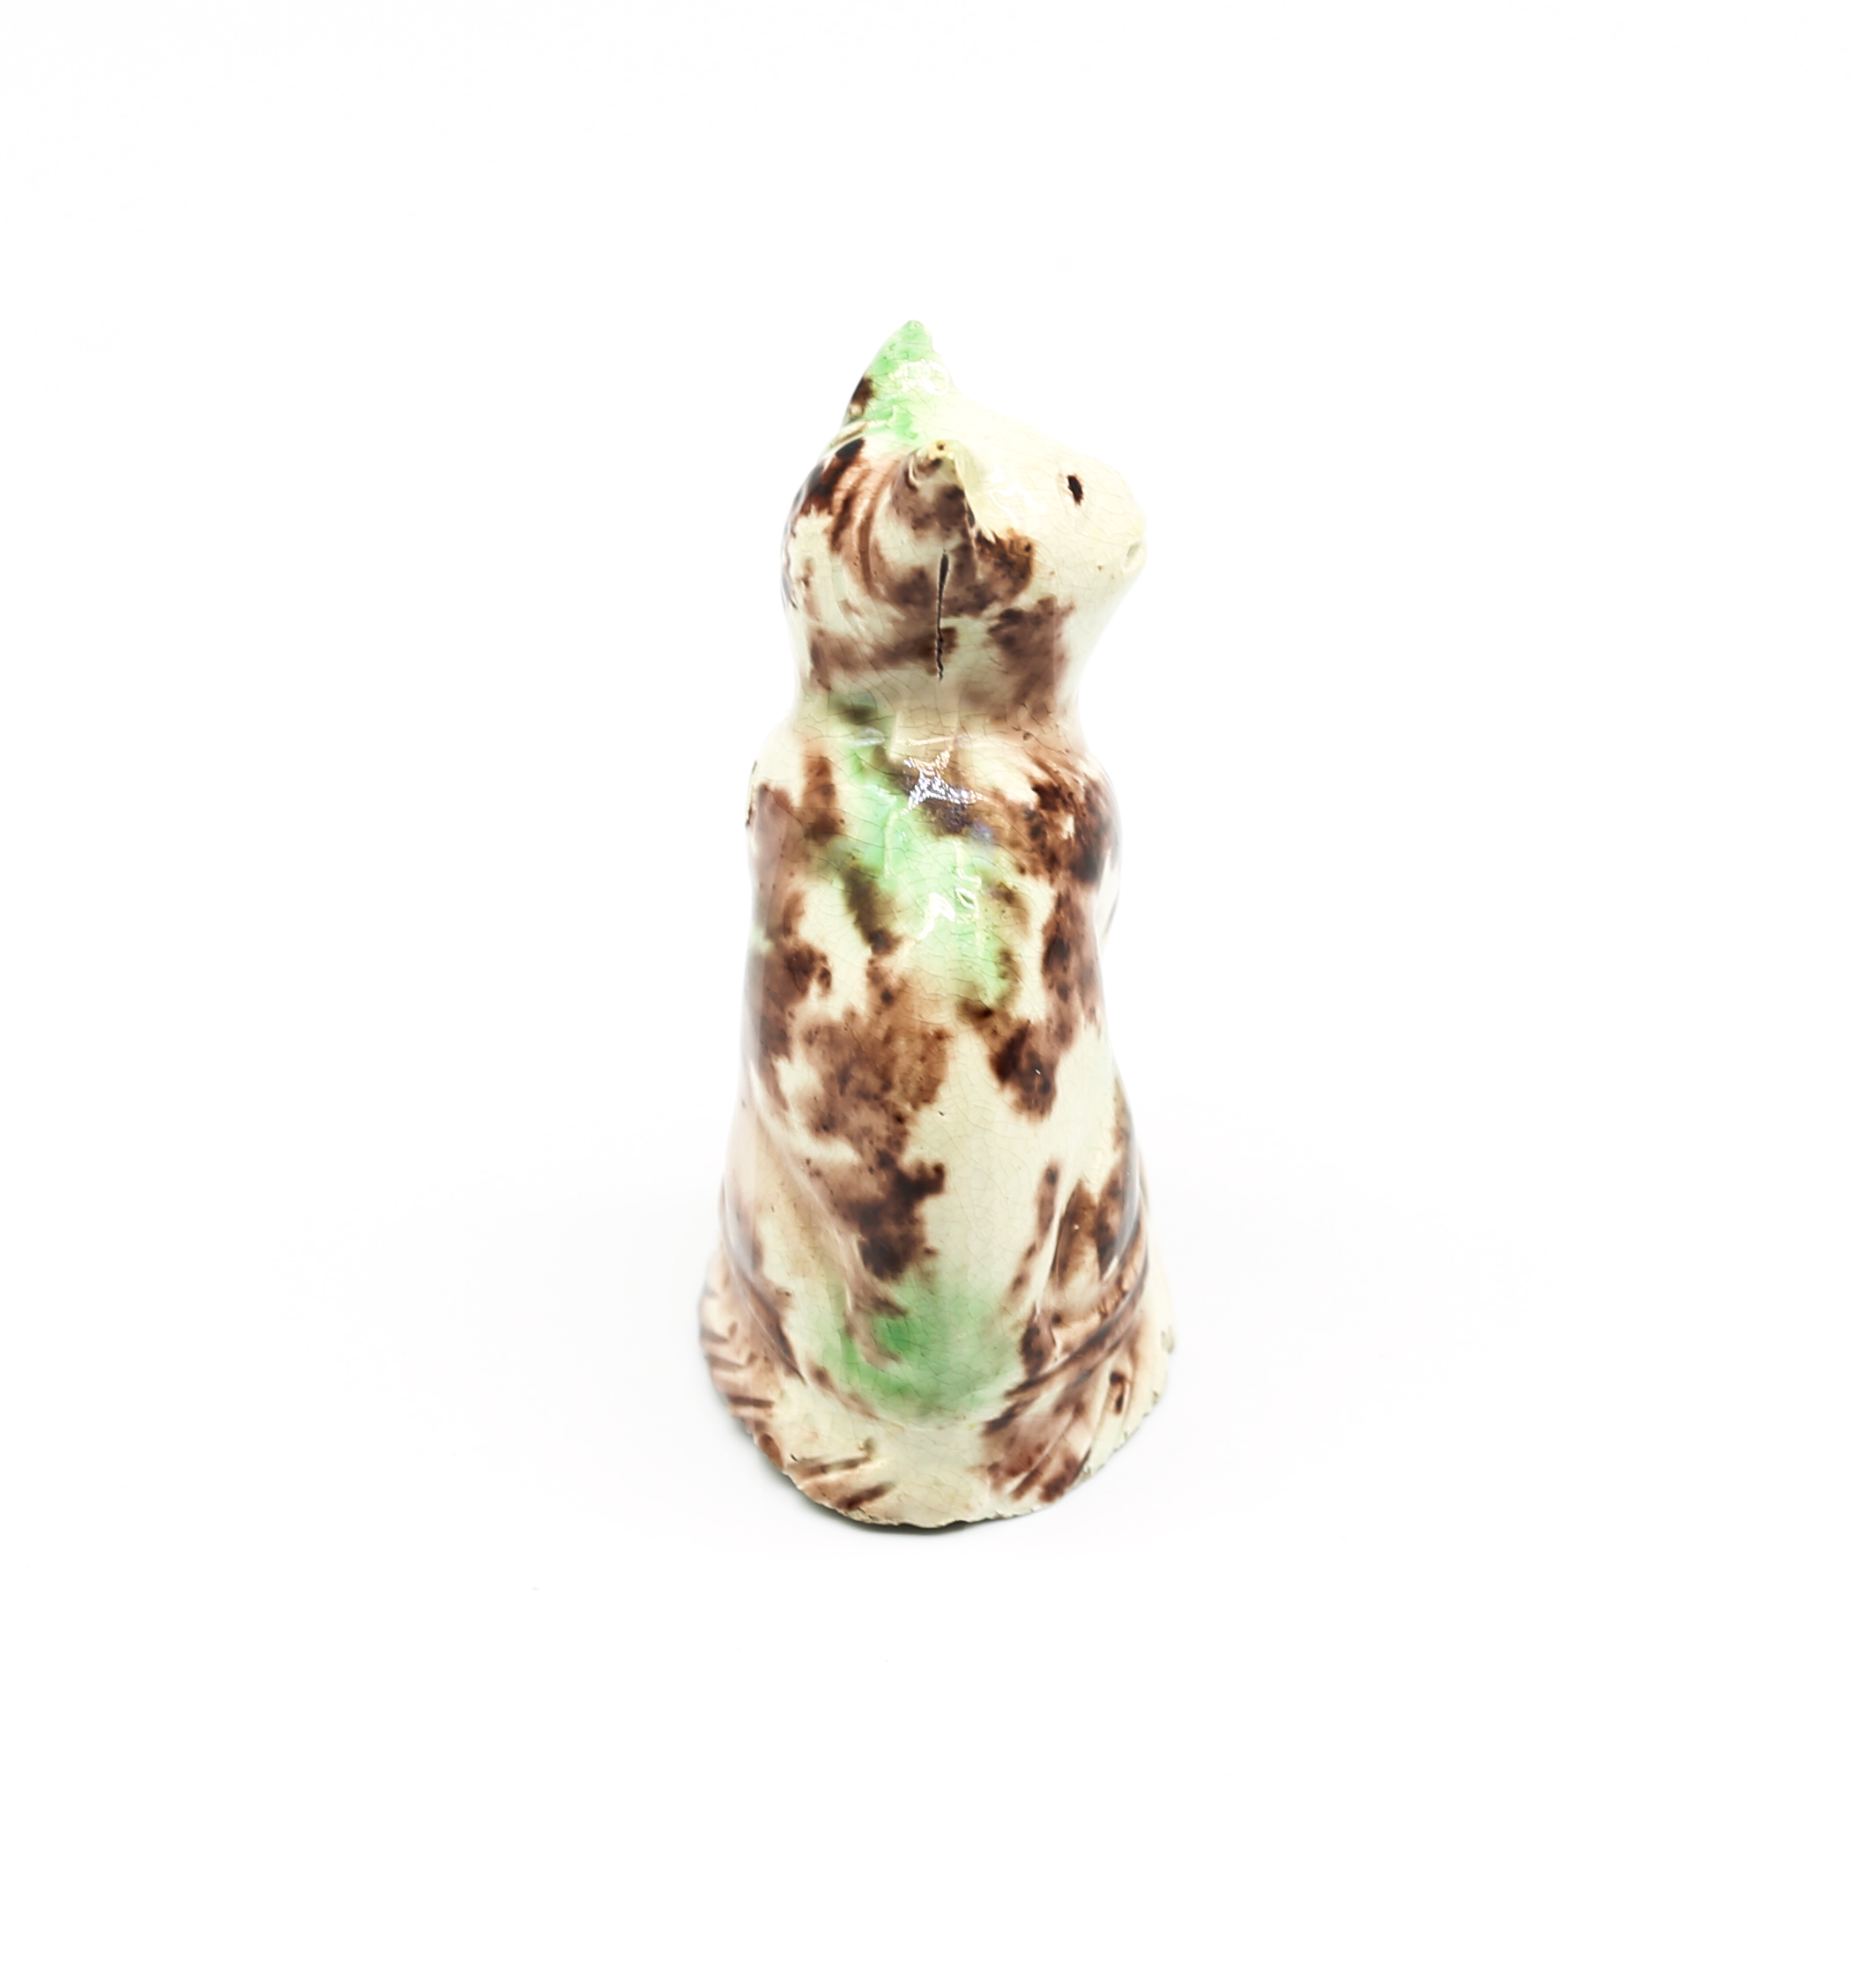 A small Staffordshire Whieldon creamware seated cat, sponge decorated in shades of green and brown - Image 4 of 7